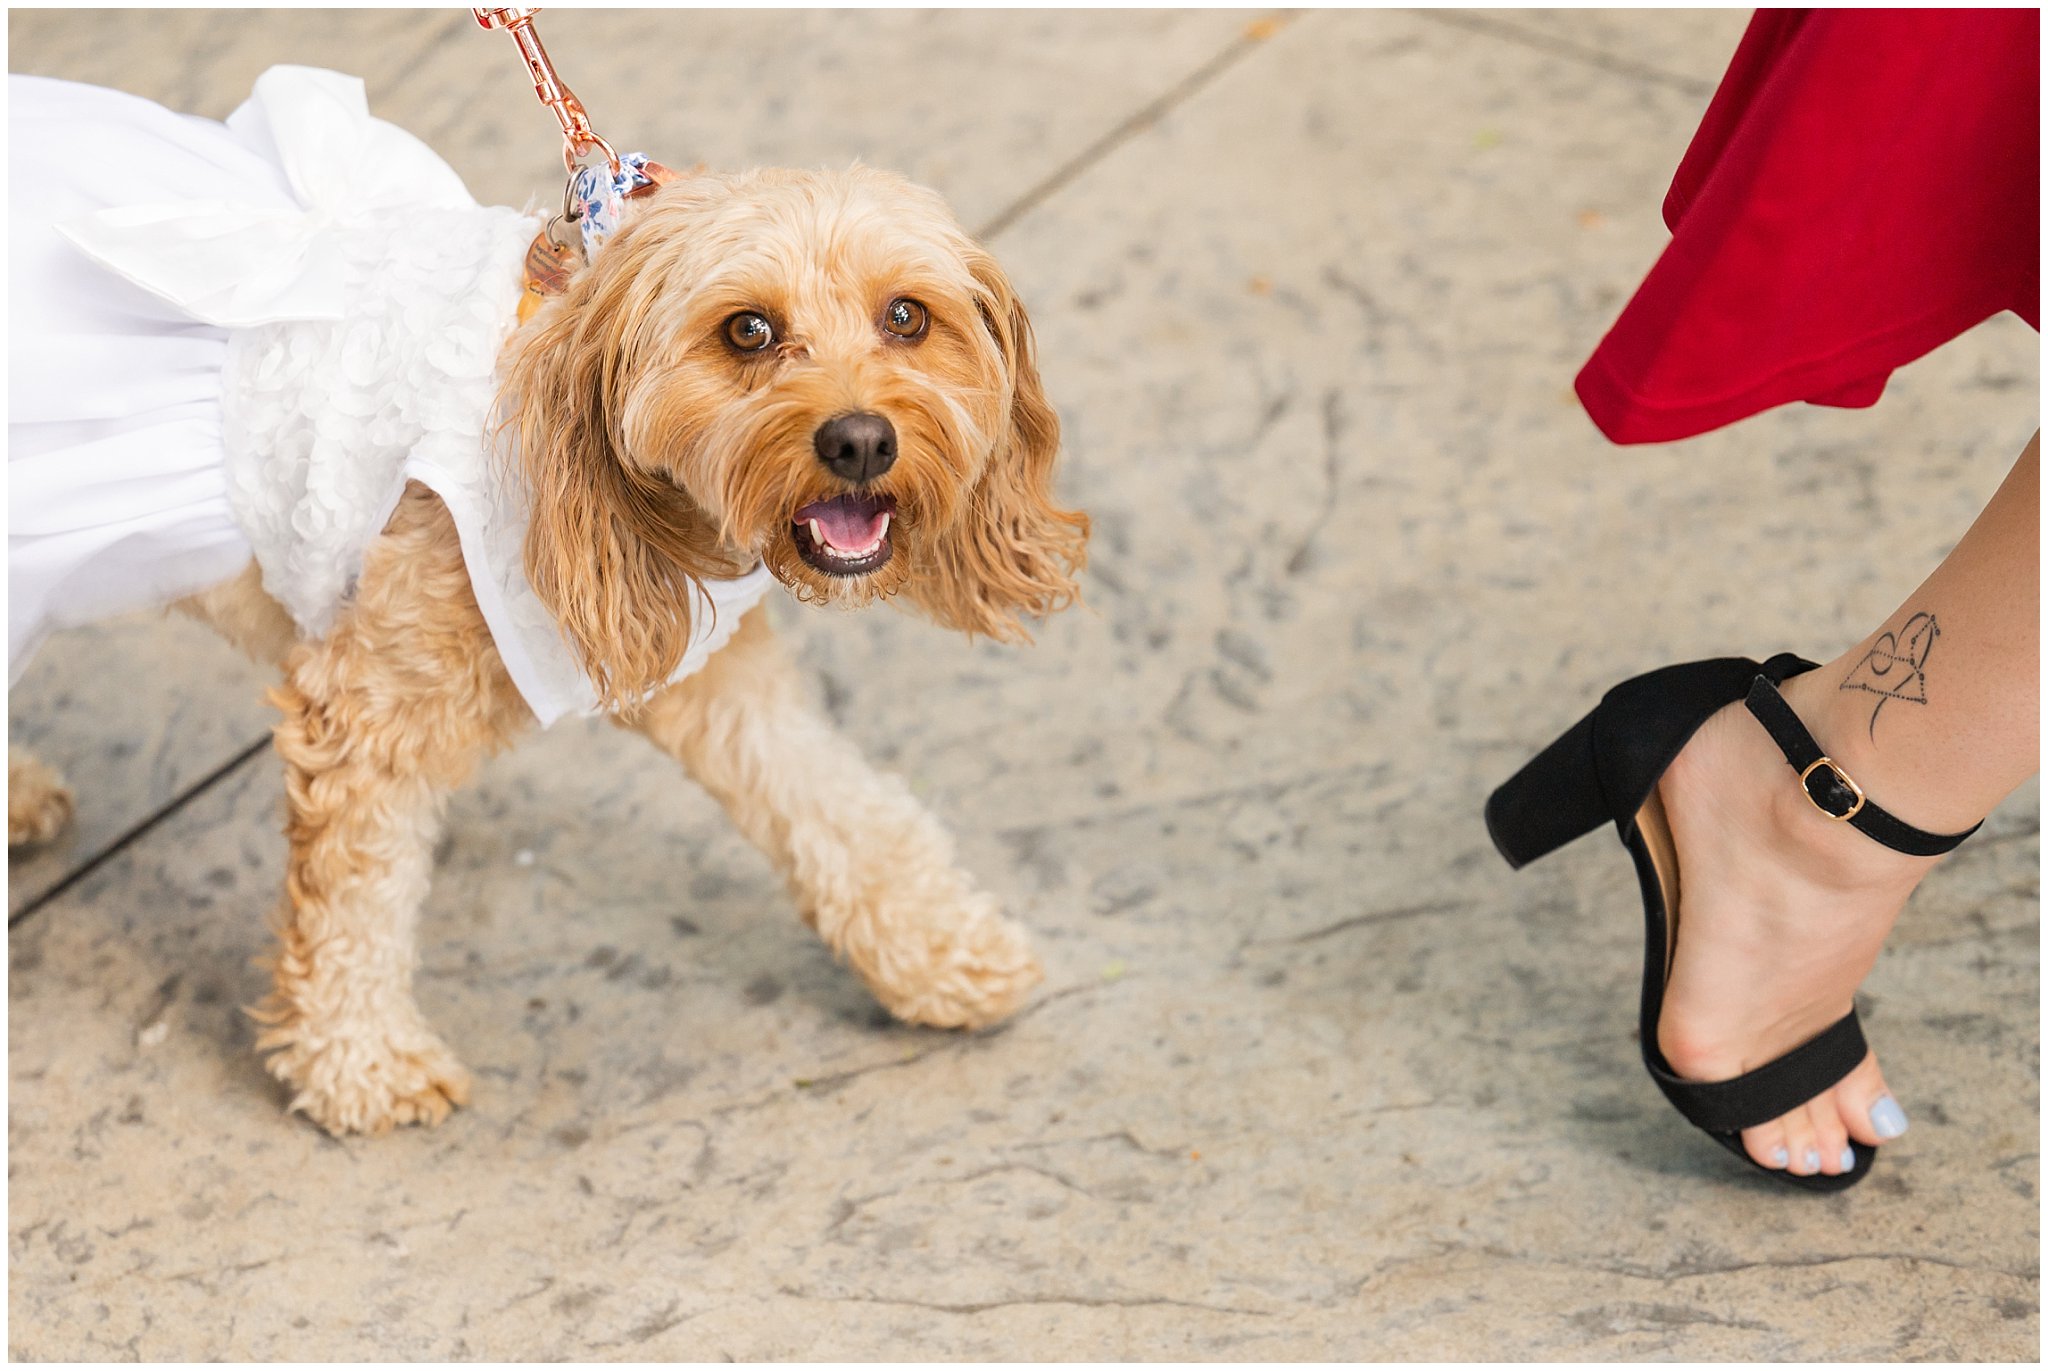 Dogs dressed up for wedding ceremony at Eldredge Manor | Bountiful Temple and Eldredge Manor Wedding | Jessie and Dallin Photography